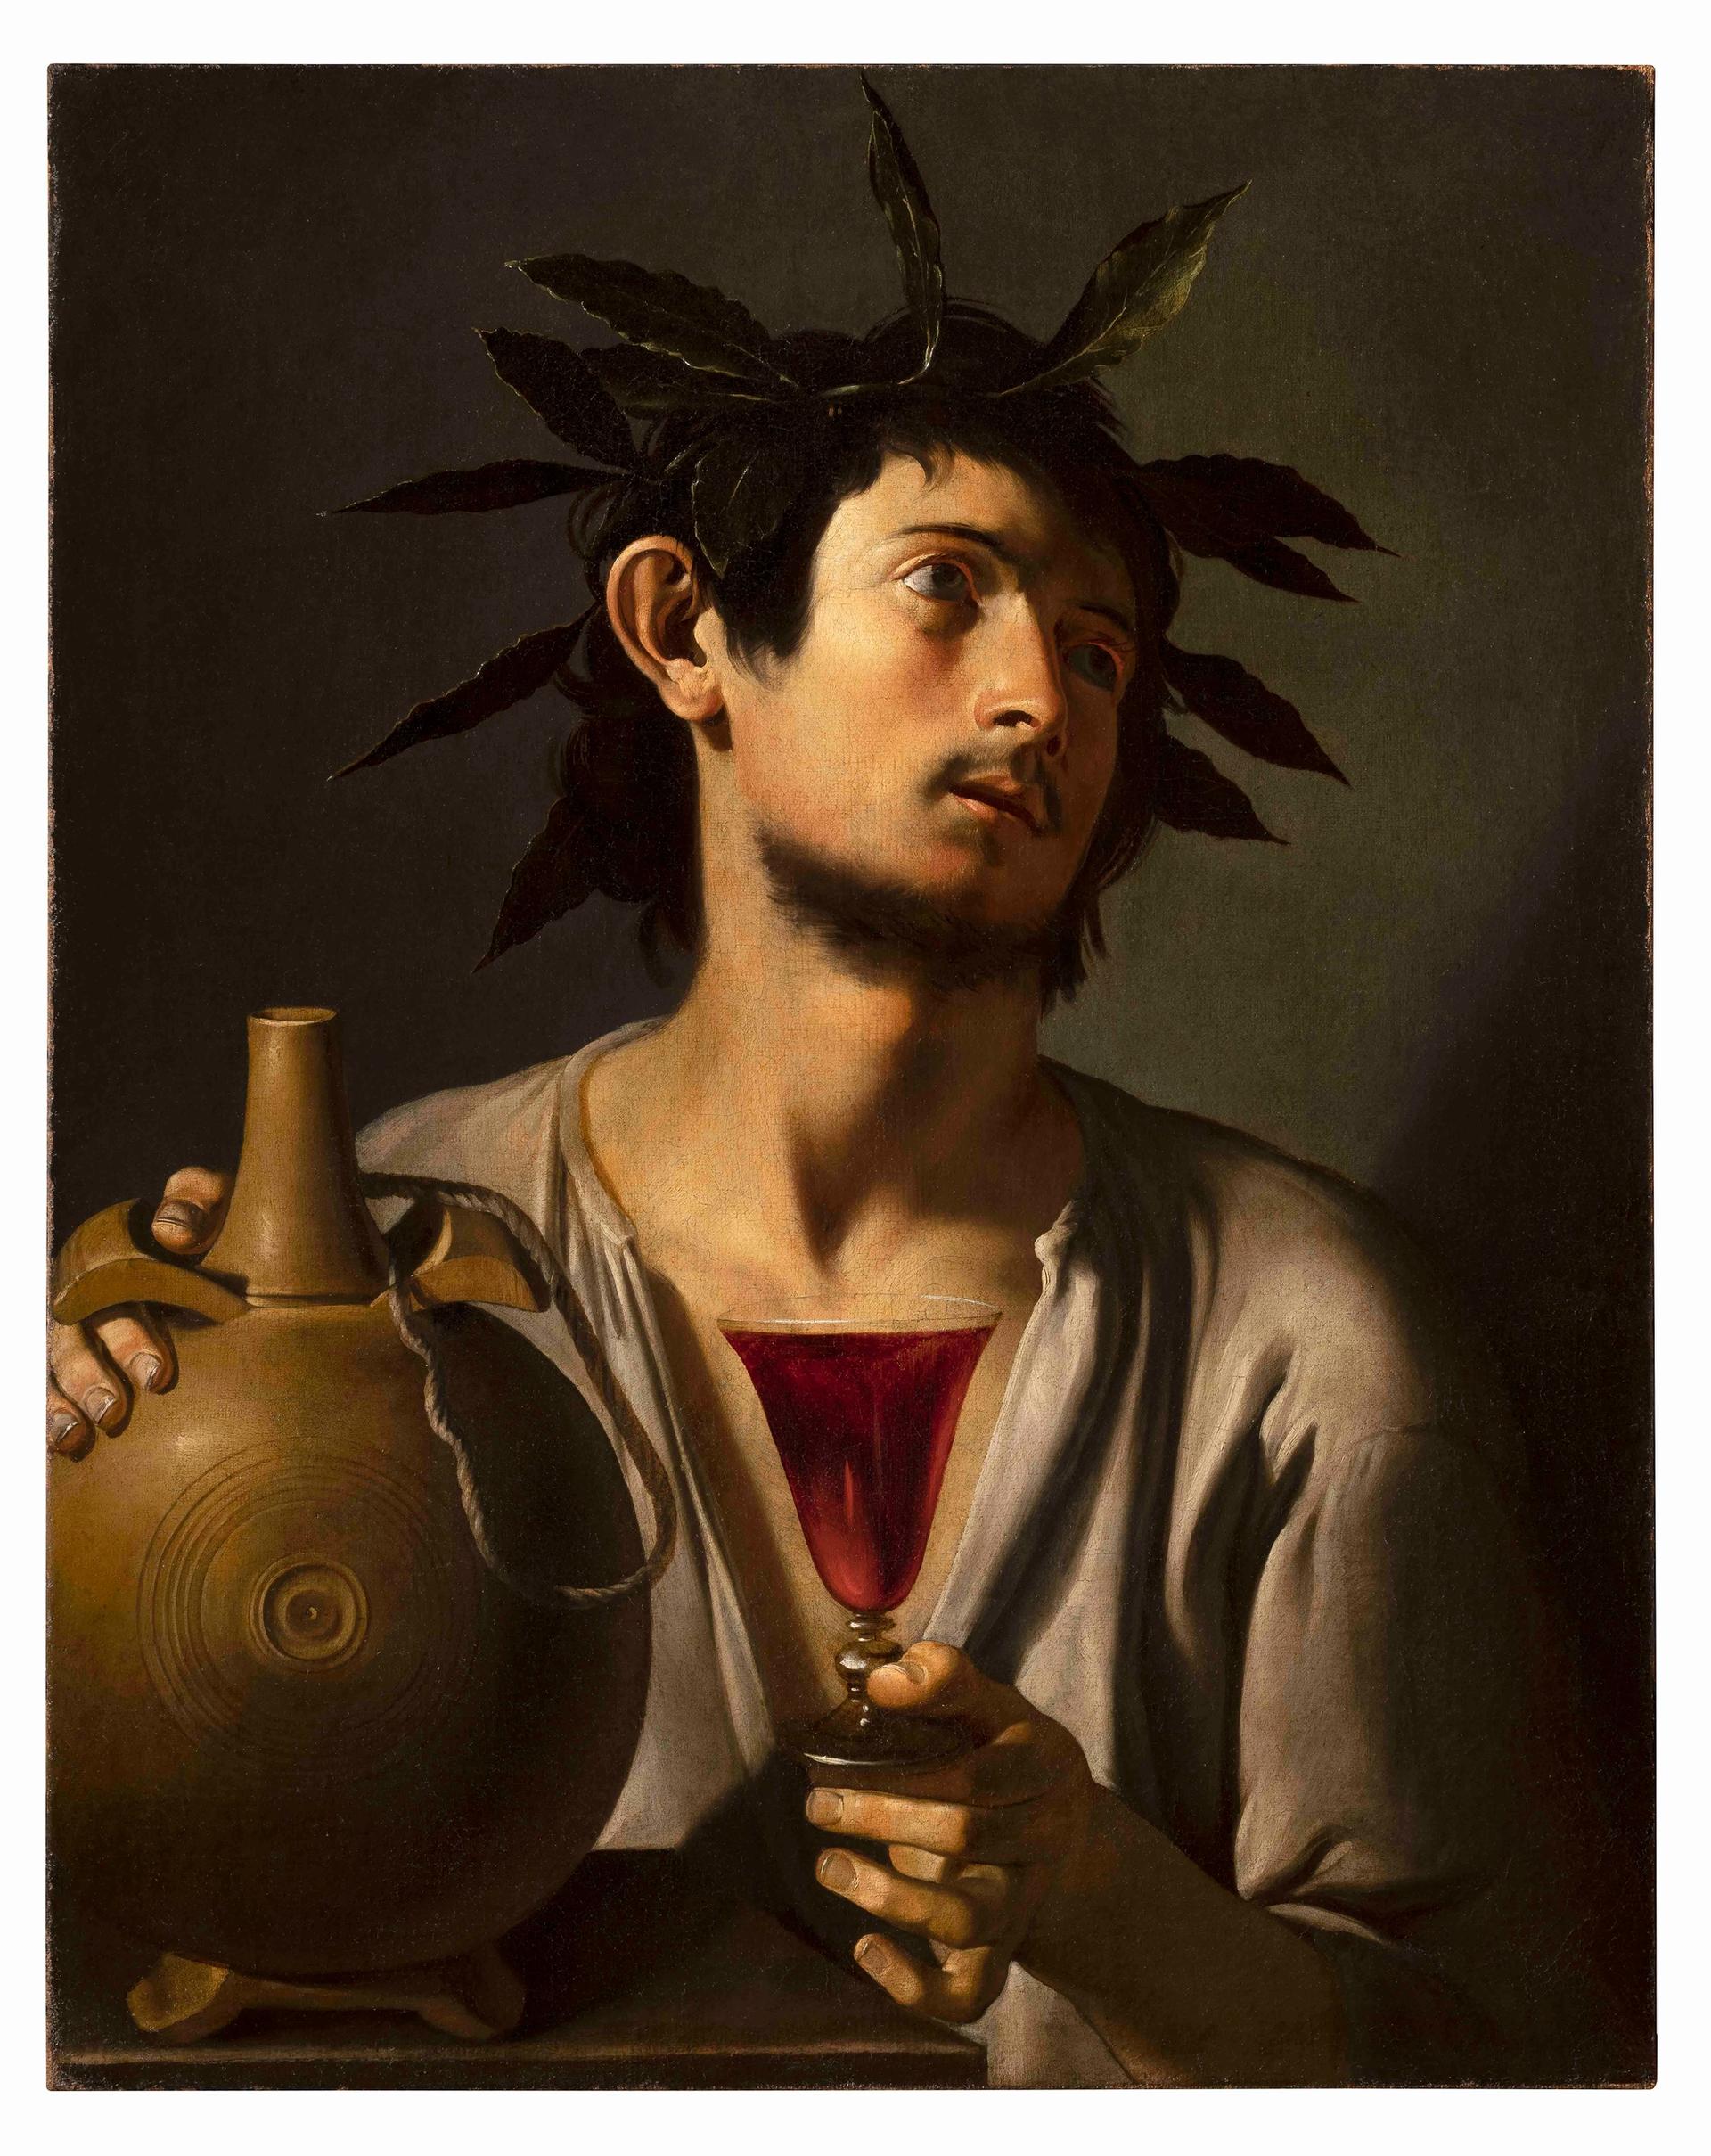 Pseudo-Tommaso Salini's Portrait of a Young Man as Bacchus, estimated at £40,000-£60,000 Courtesy of Sotheby's